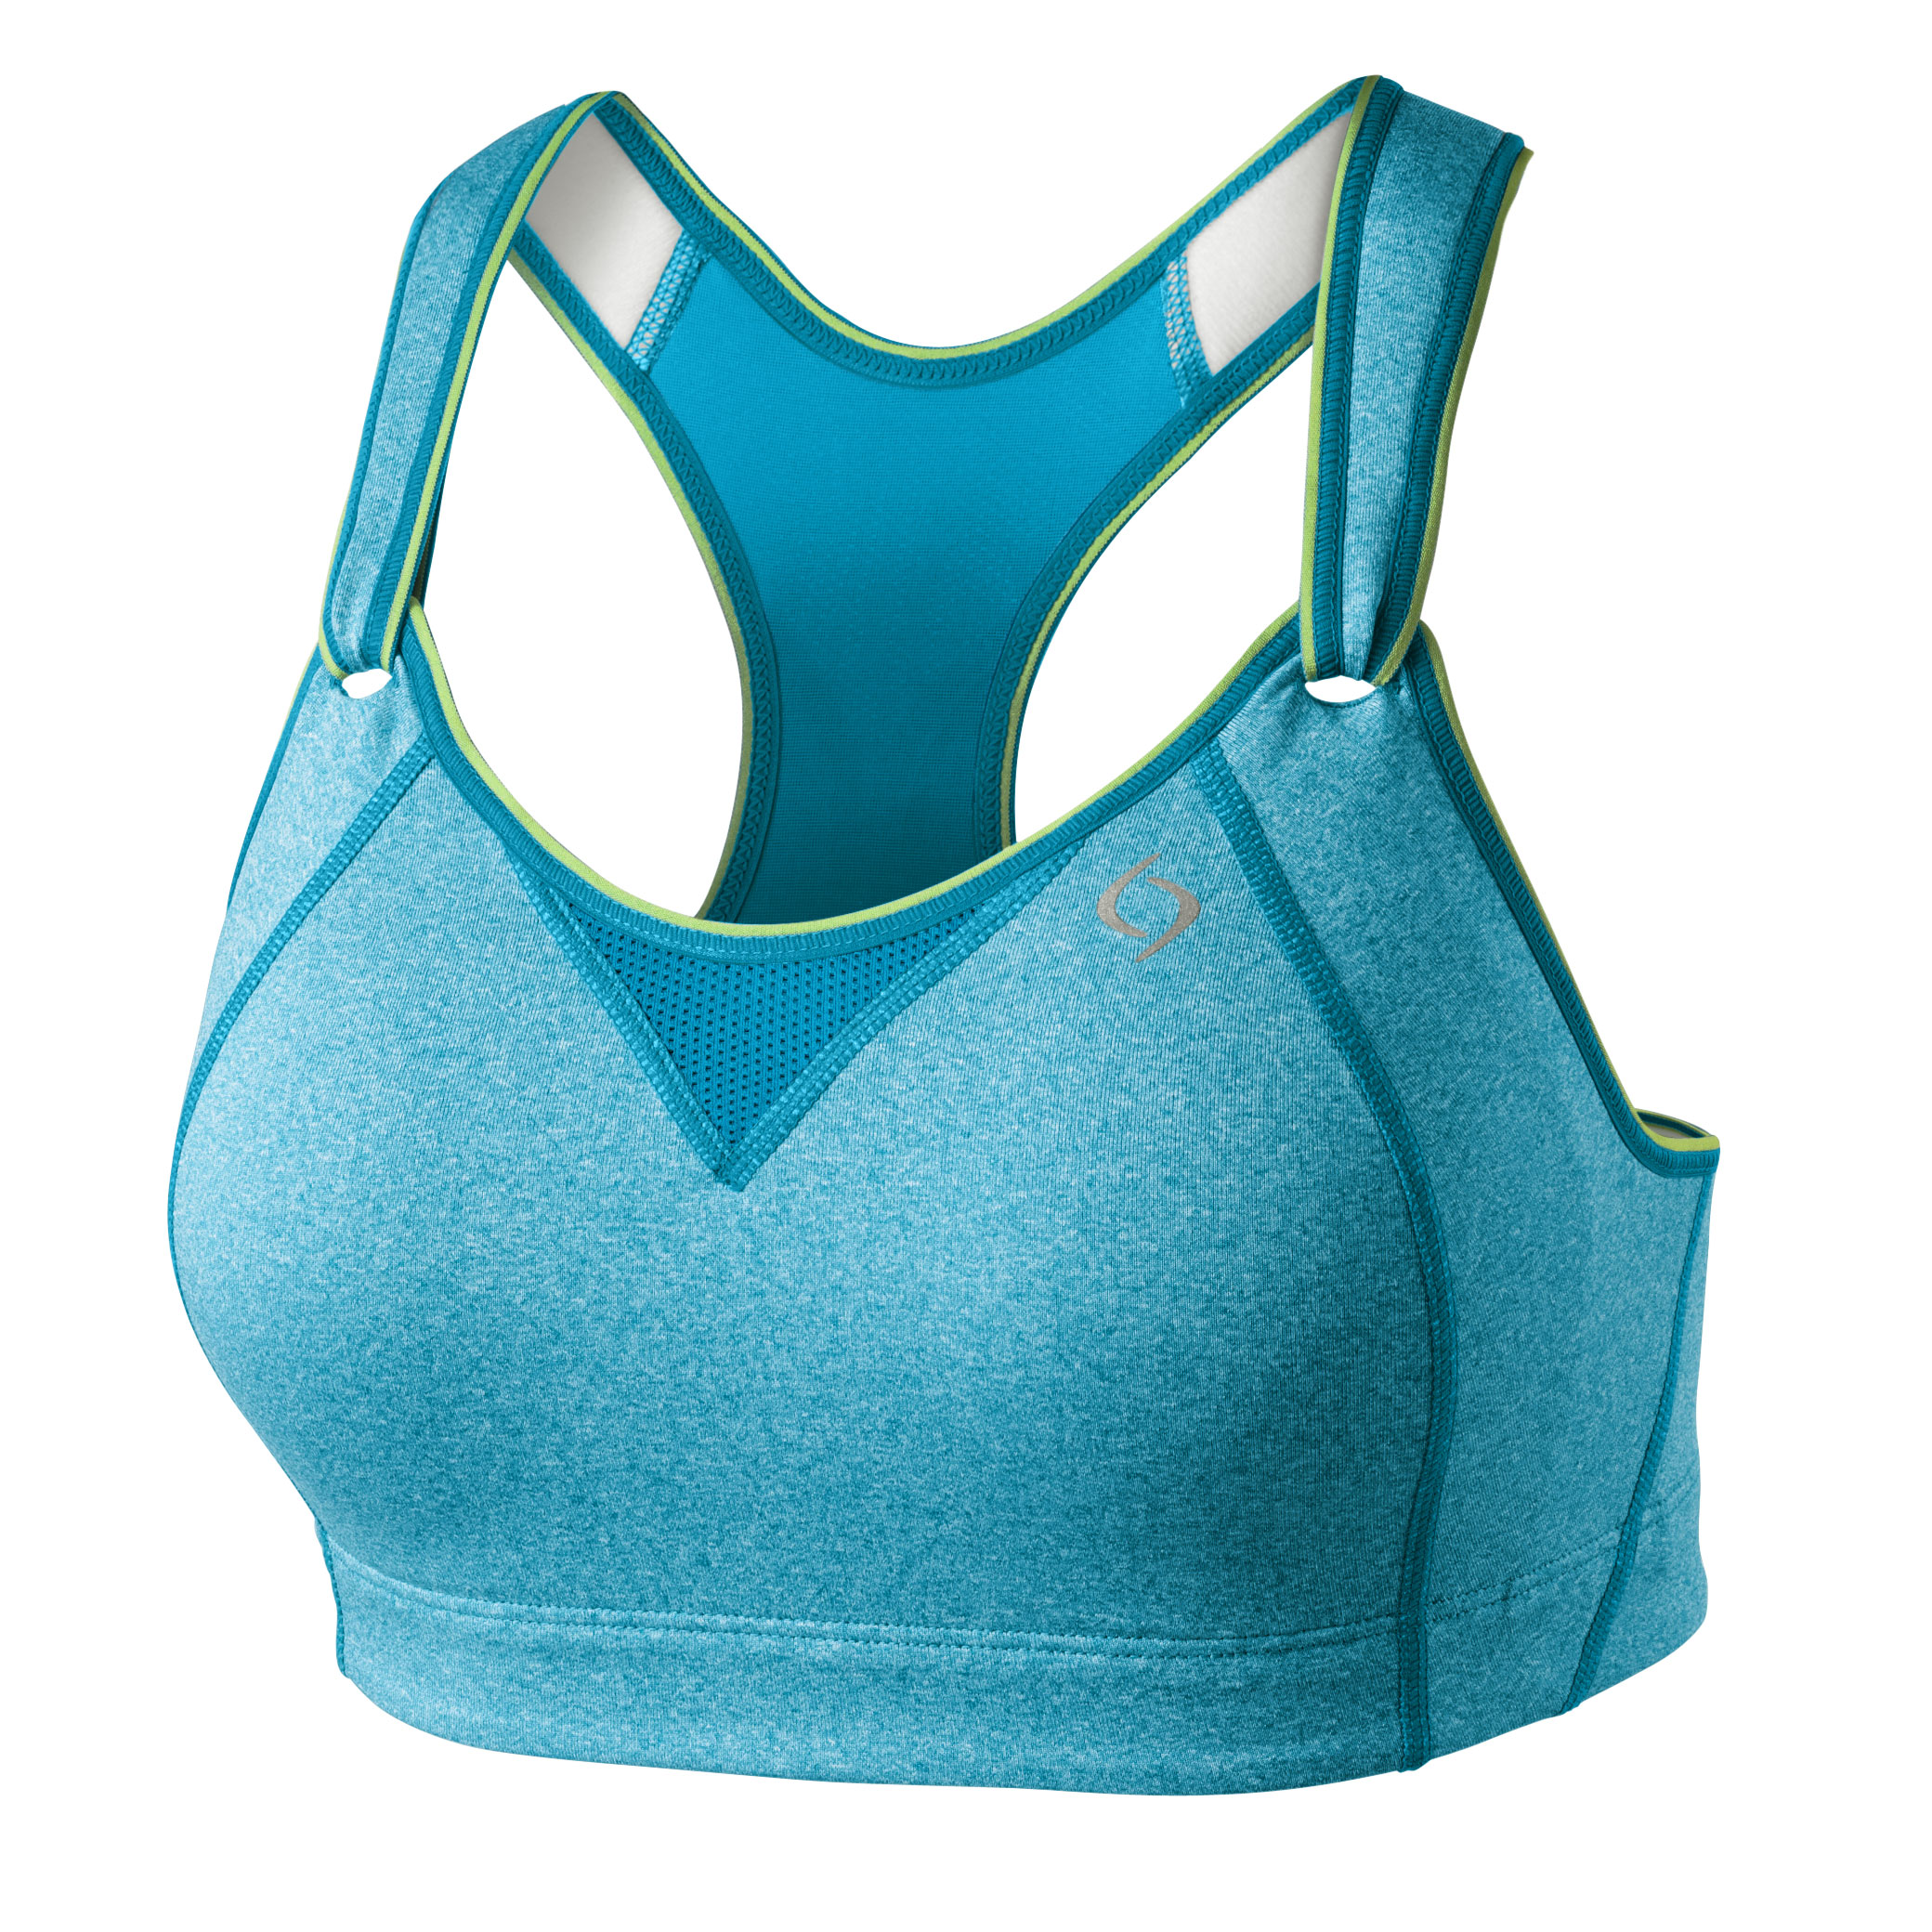 ex M&S GOOD MOVE EXTRA HIGH IMPACT ZIP FRONT SPORTS Bra SOFT TURQUOISE Size  38GG